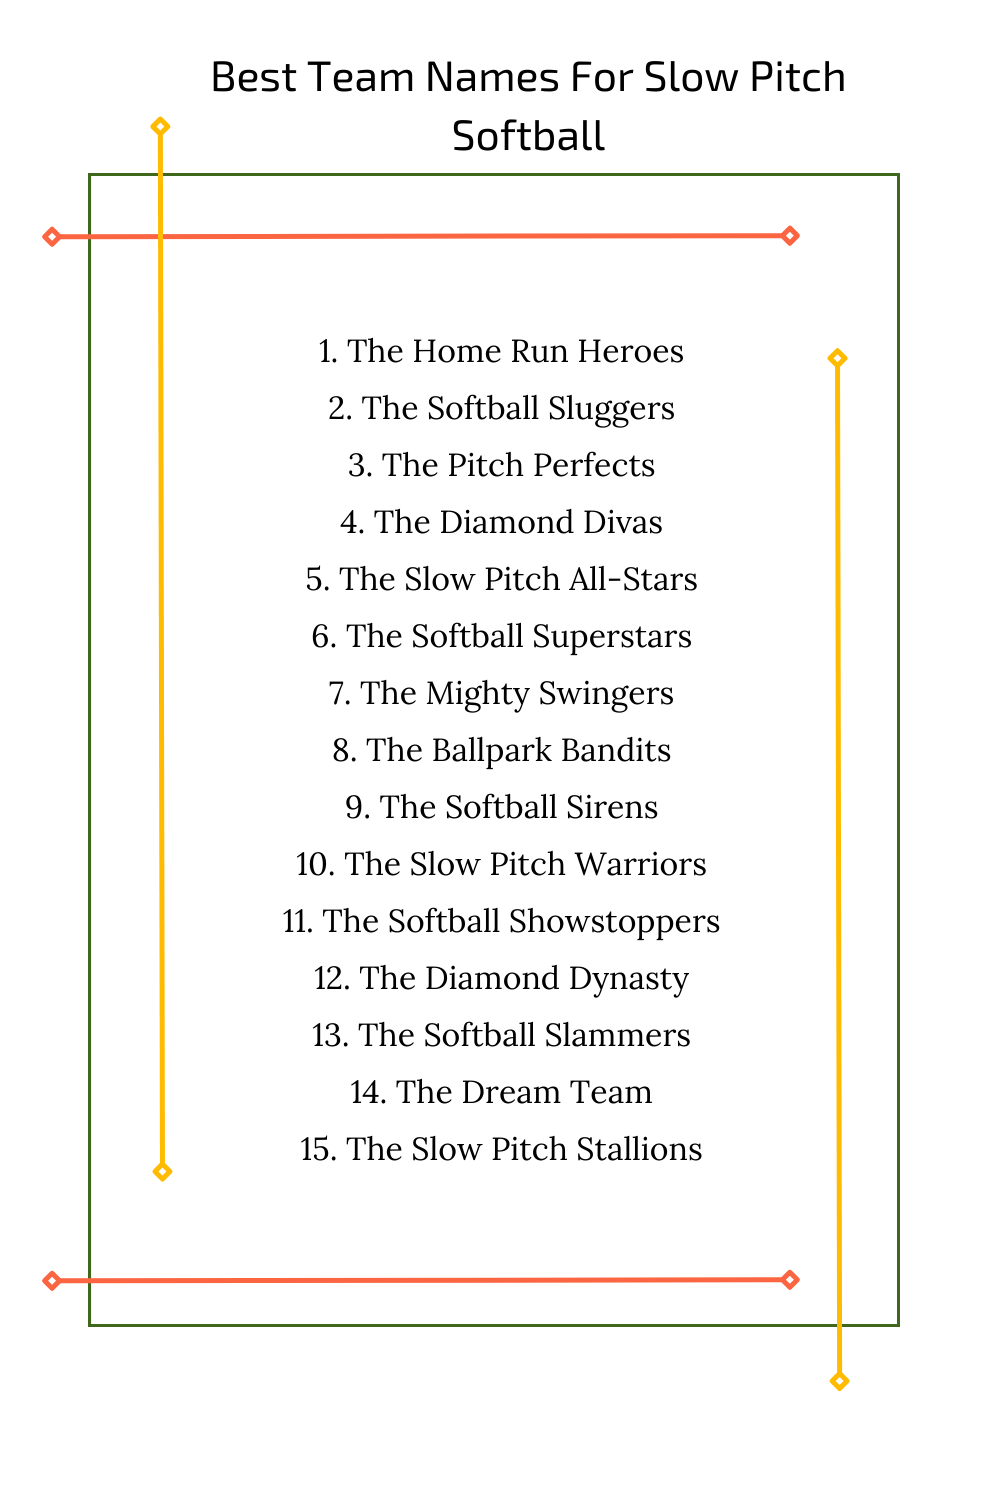 Best Team Names For Slow Pitch Softball